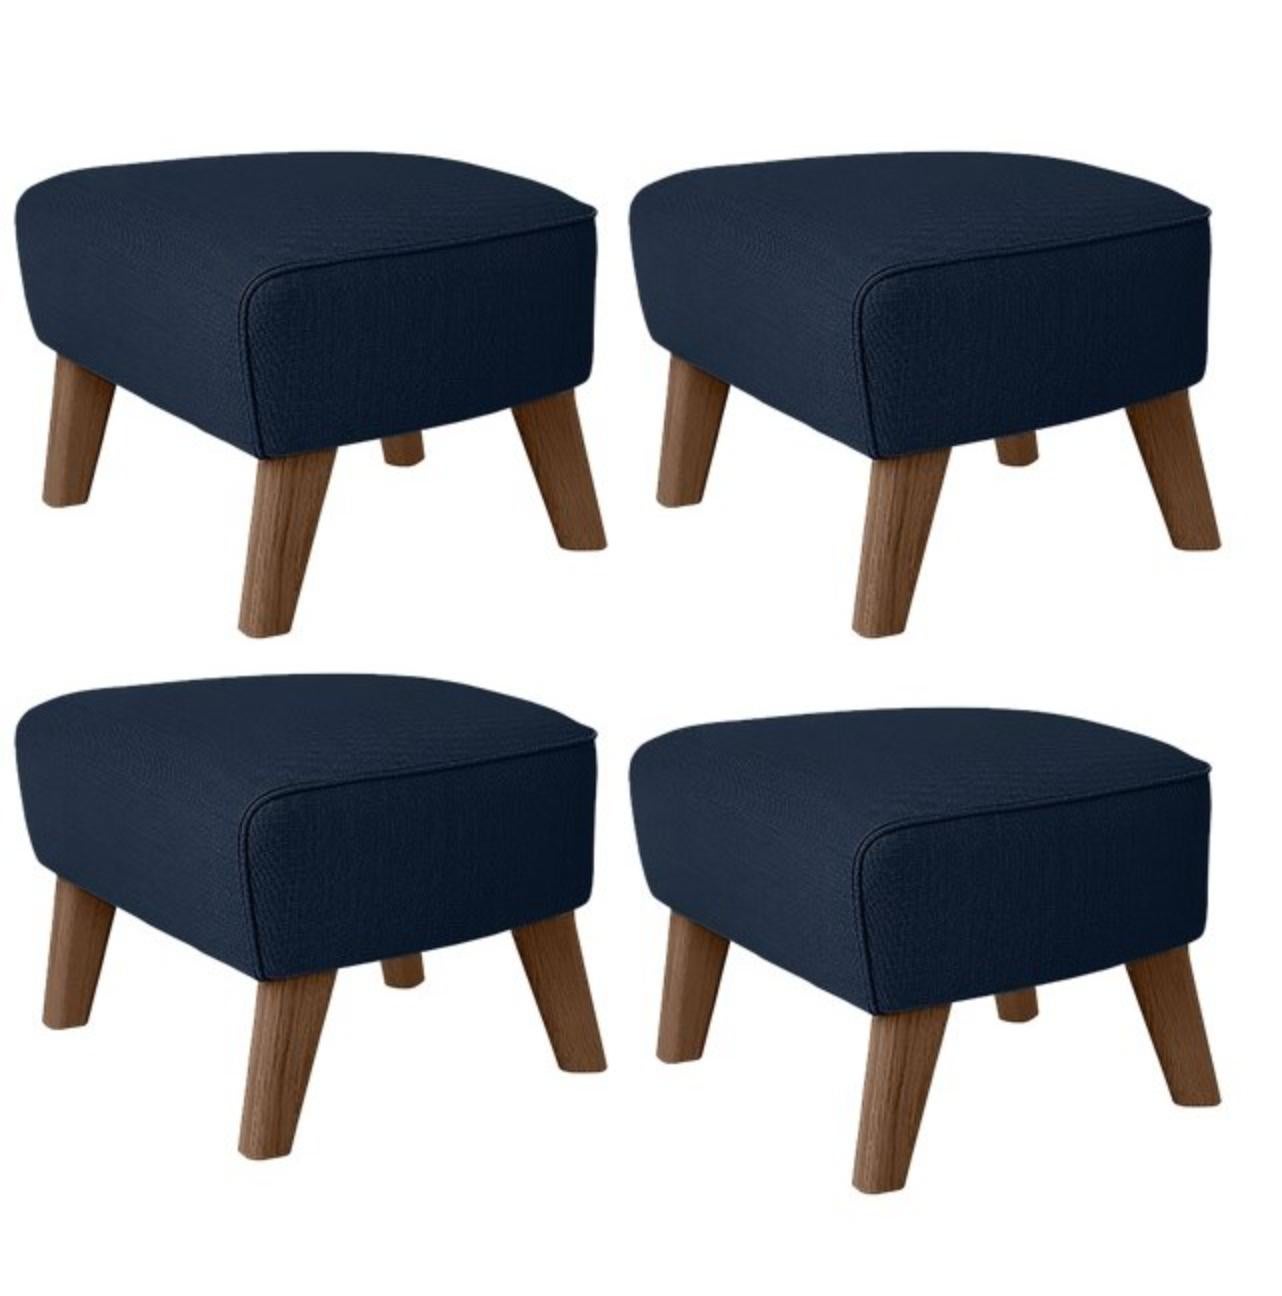 Set of 4 blue and smoked oak sahco zero footstool by Lassen
Dimensions: W 56 x D 58 x H 40 cm 
Materials: Textile
Also available: other colors available.

The my own chair footstool has been designed in the same spirit as Flemming Lassen’s